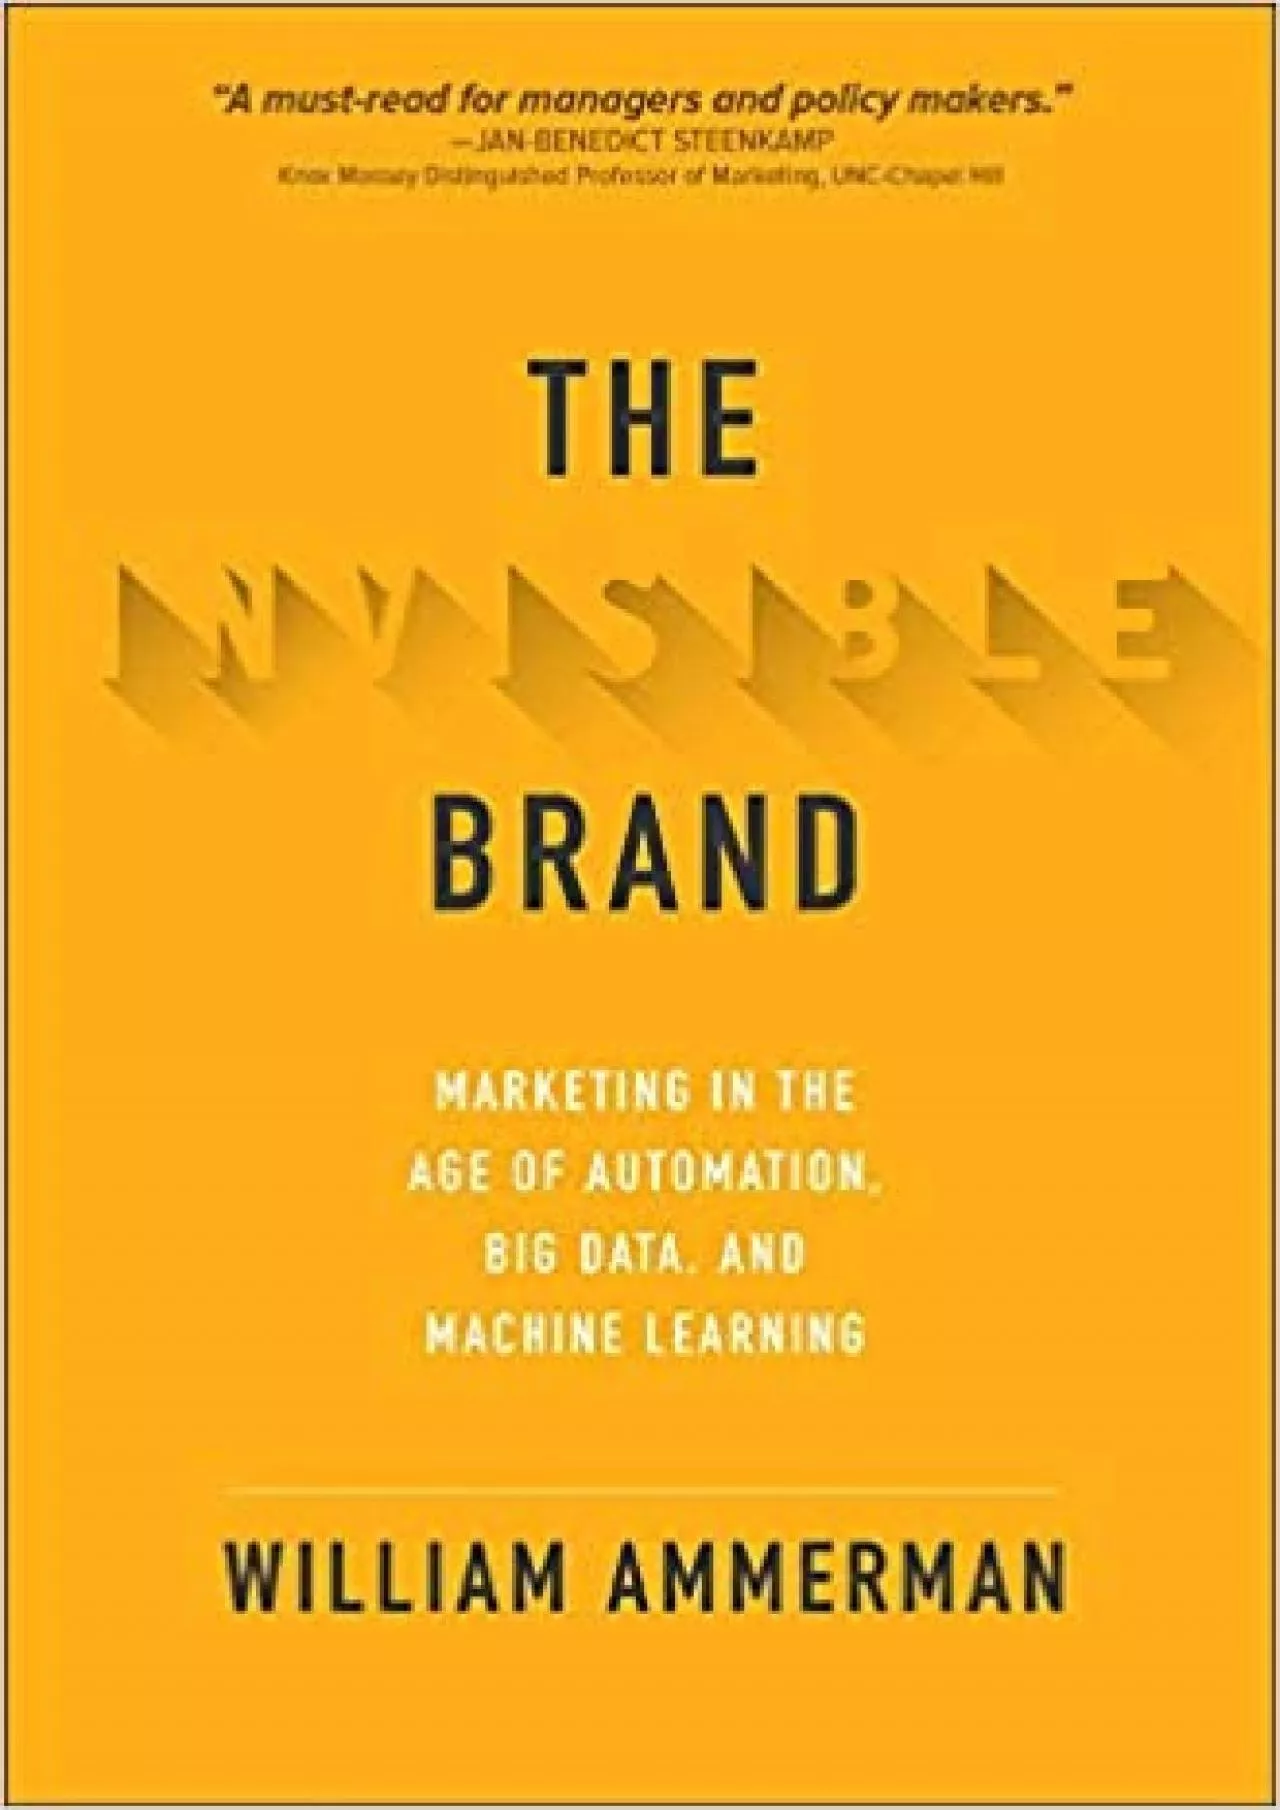 The Invisible Brand Marketing in the Age of Automation, Big Data, and Machine Learning